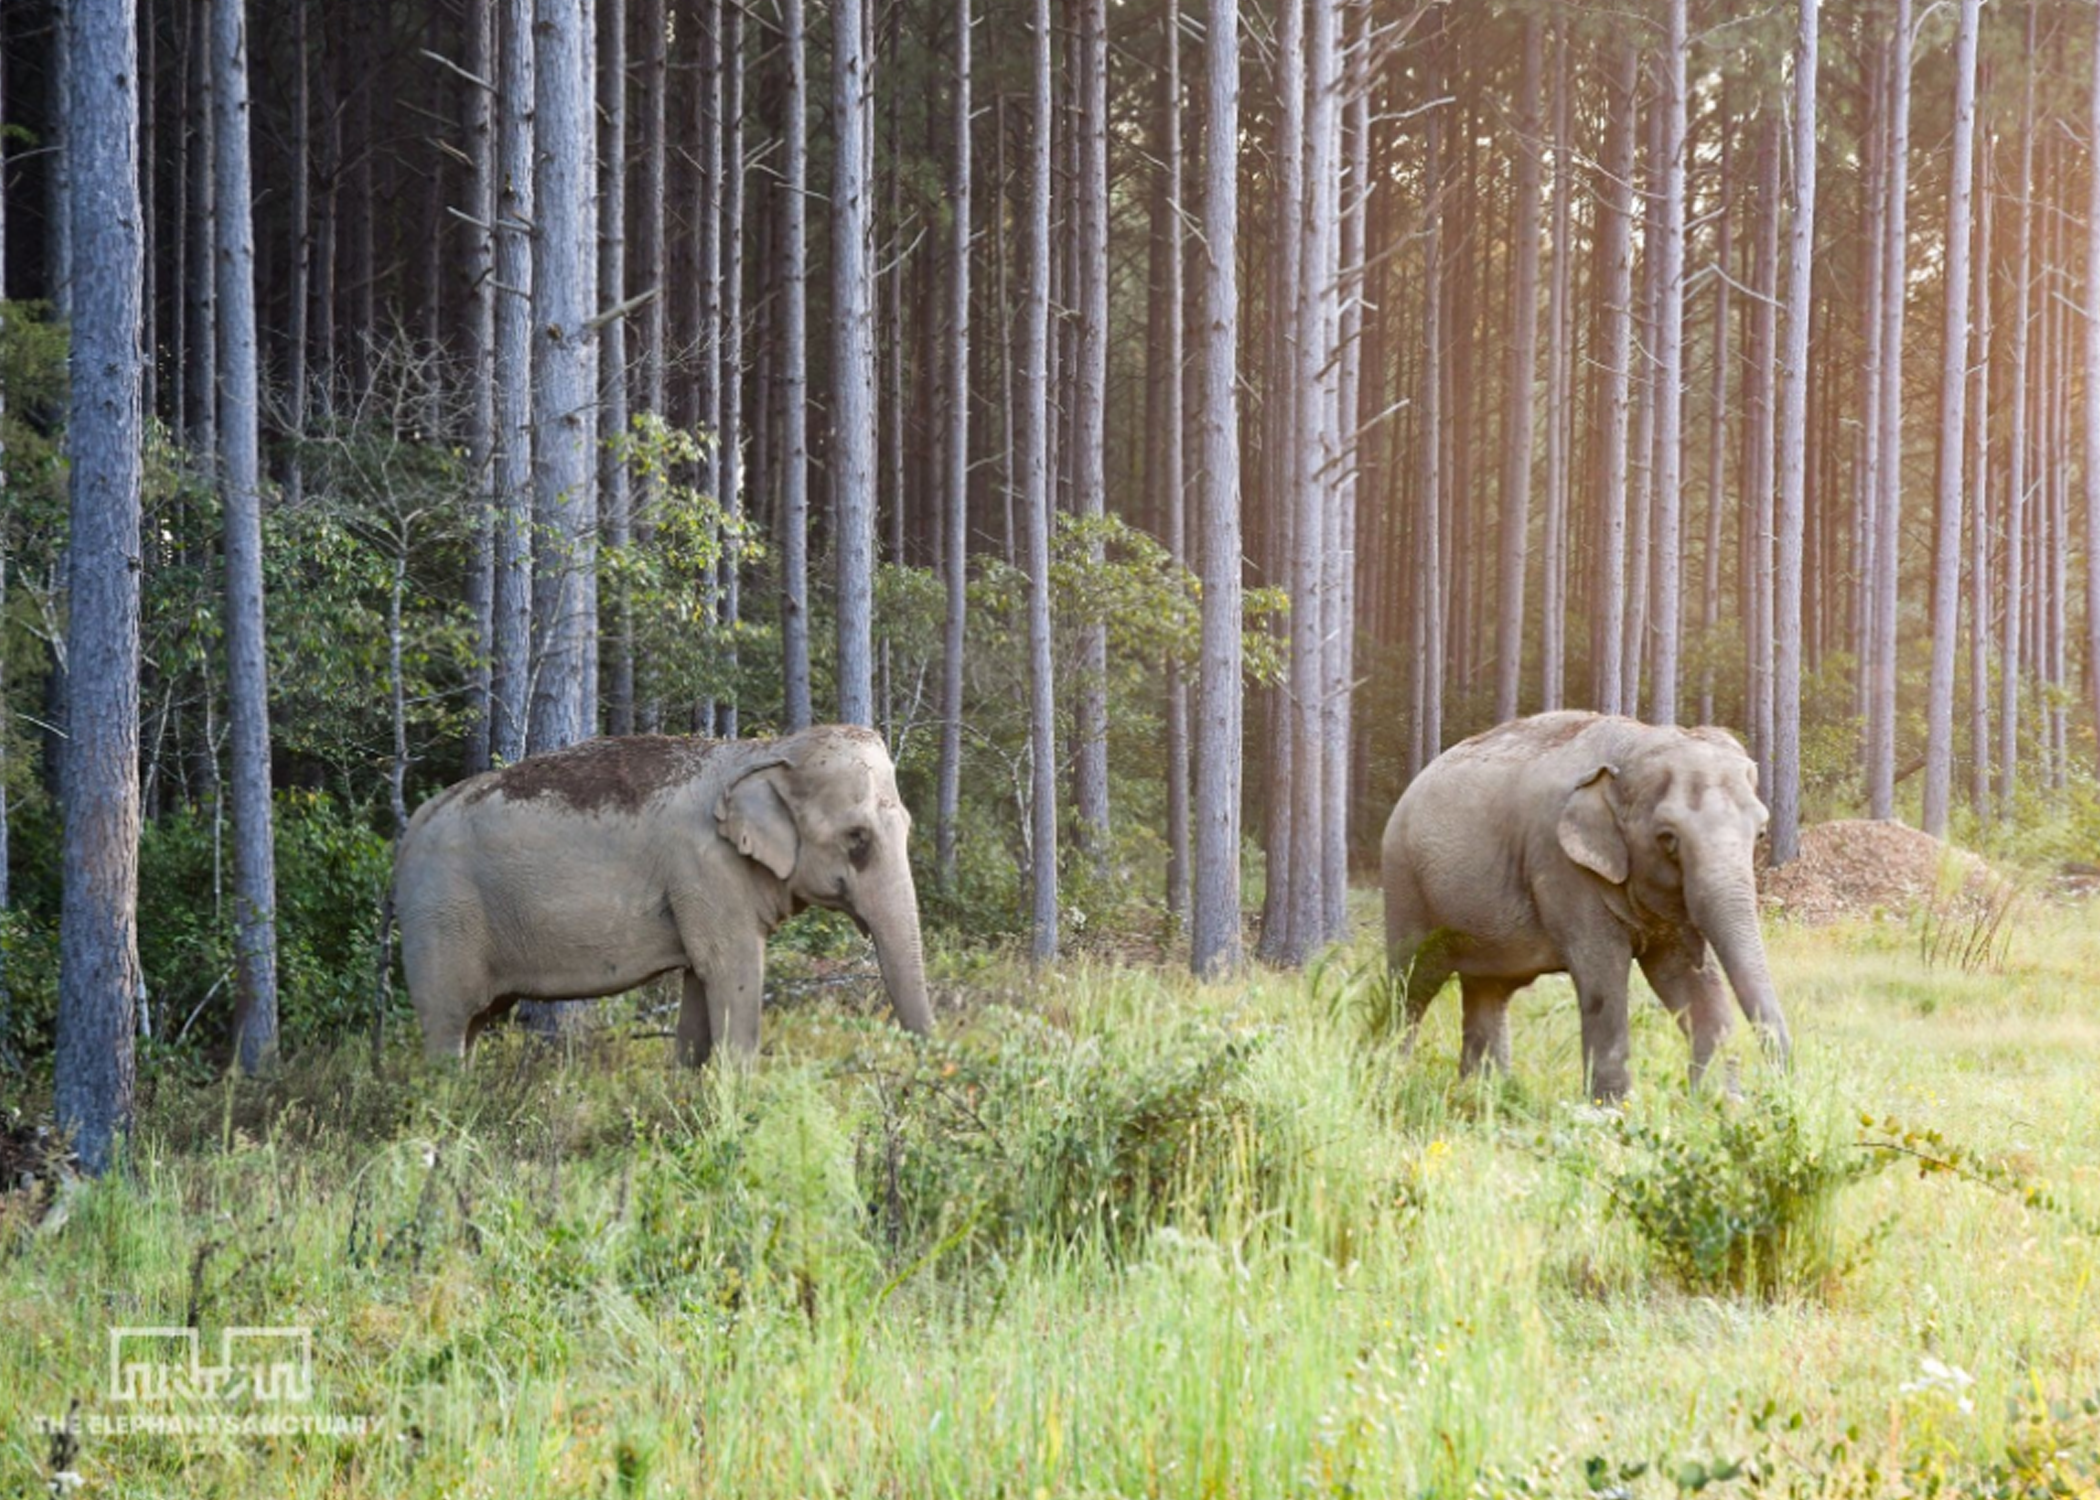 2 elephants in forest at Elephant Sanctuary in Tennessee